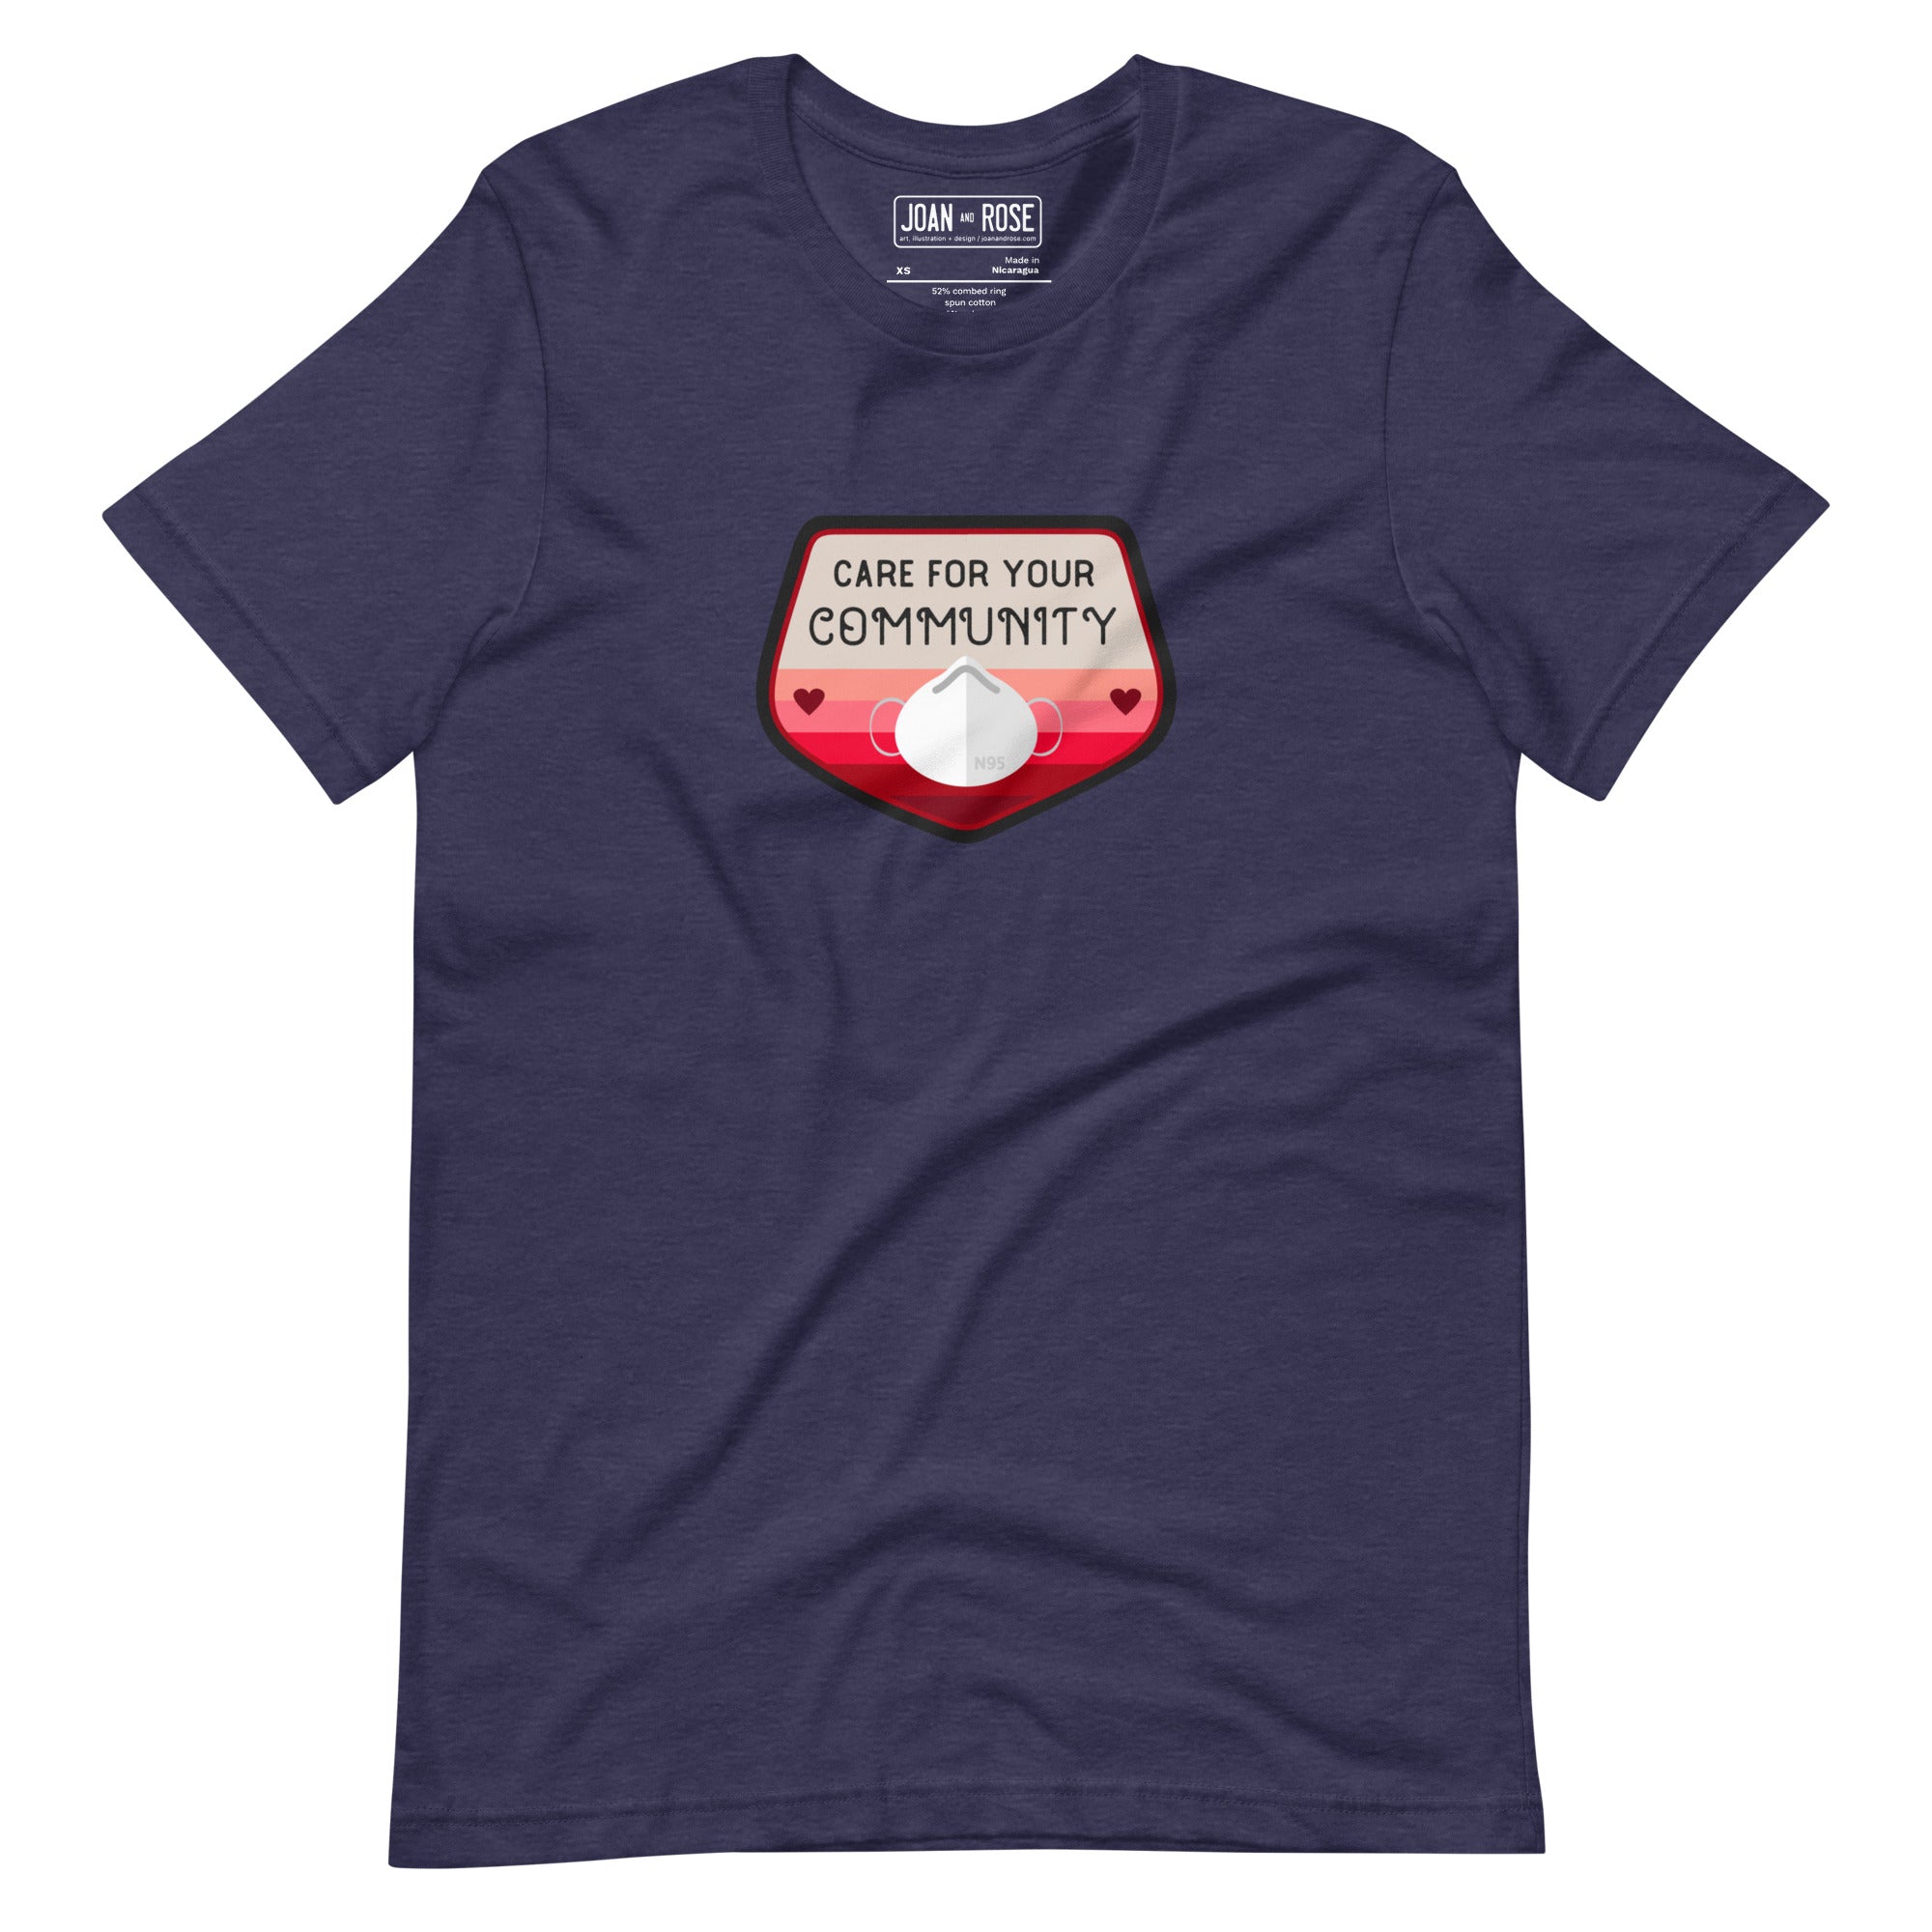 View of Care for your community t-shirt in heather midnight navy